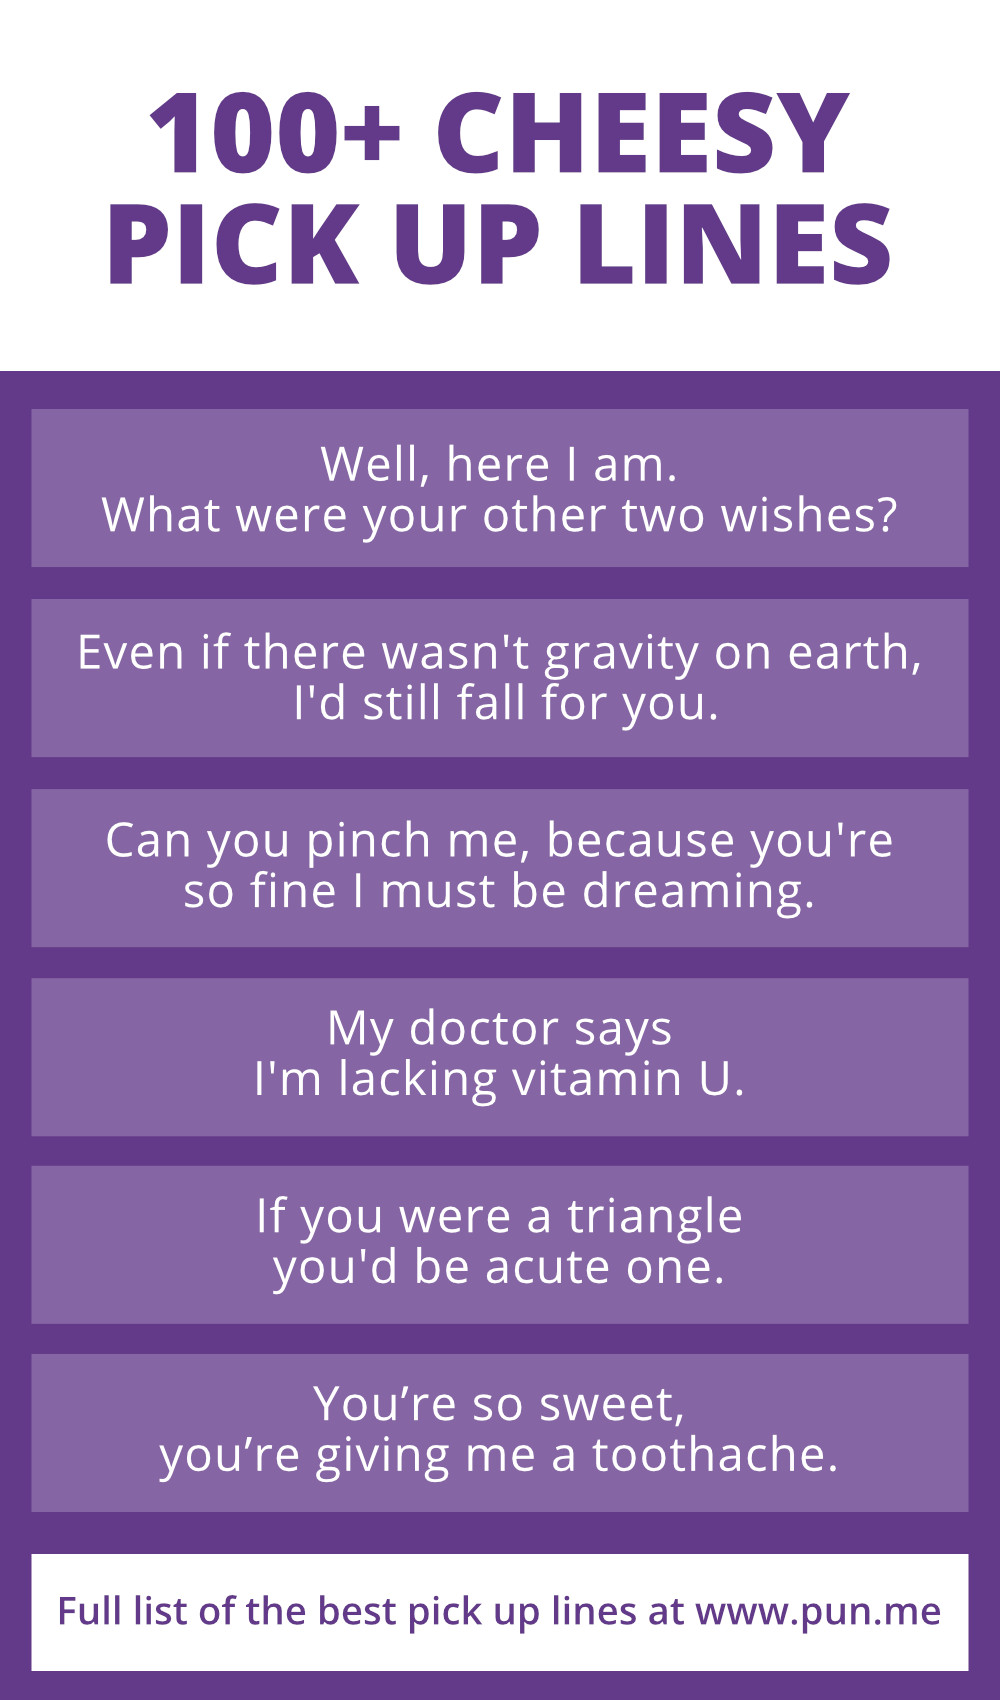 Hilarious pick up lines